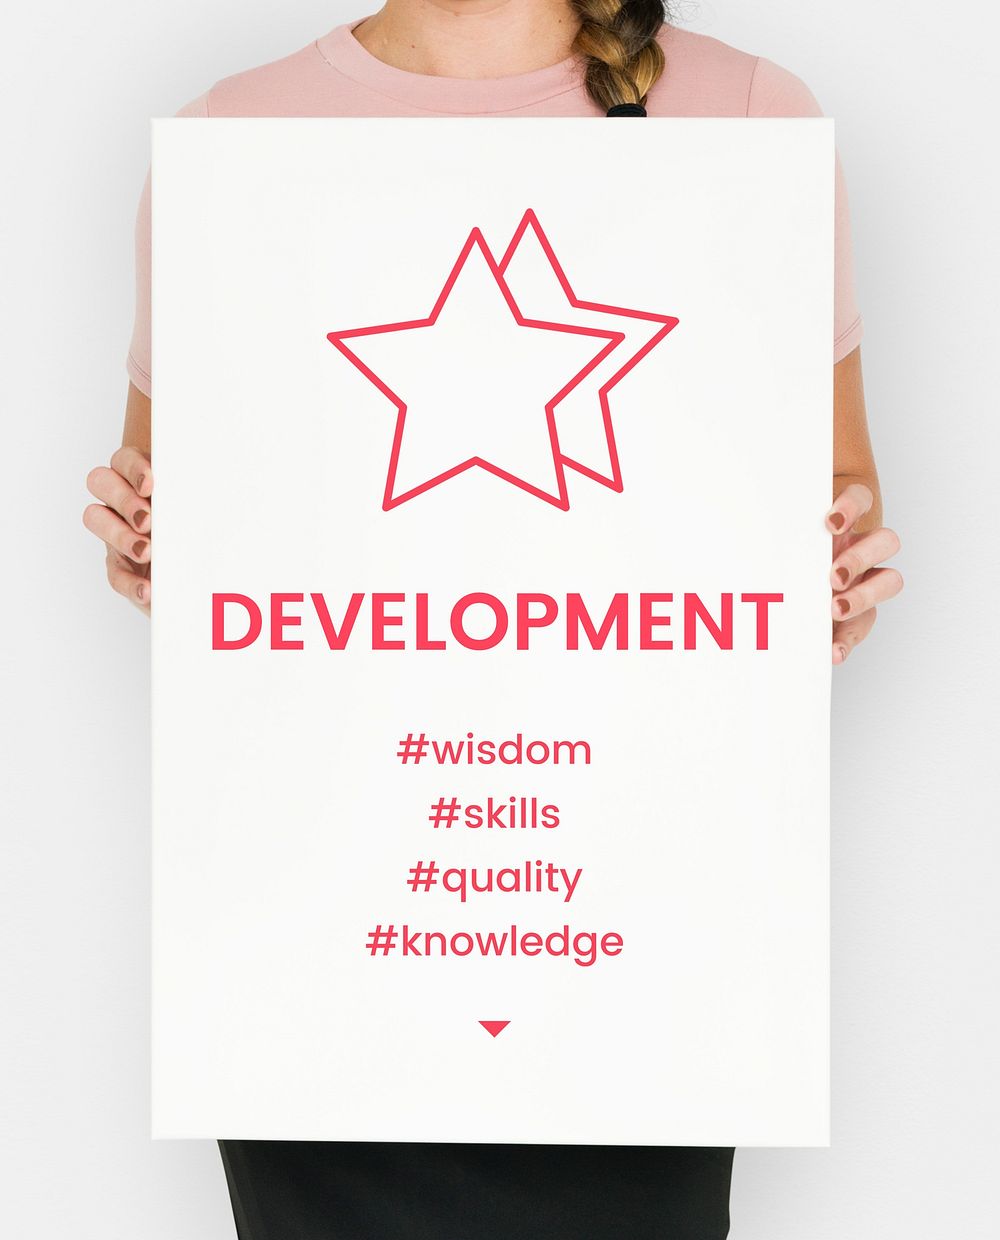 People holding Placard with star development icon